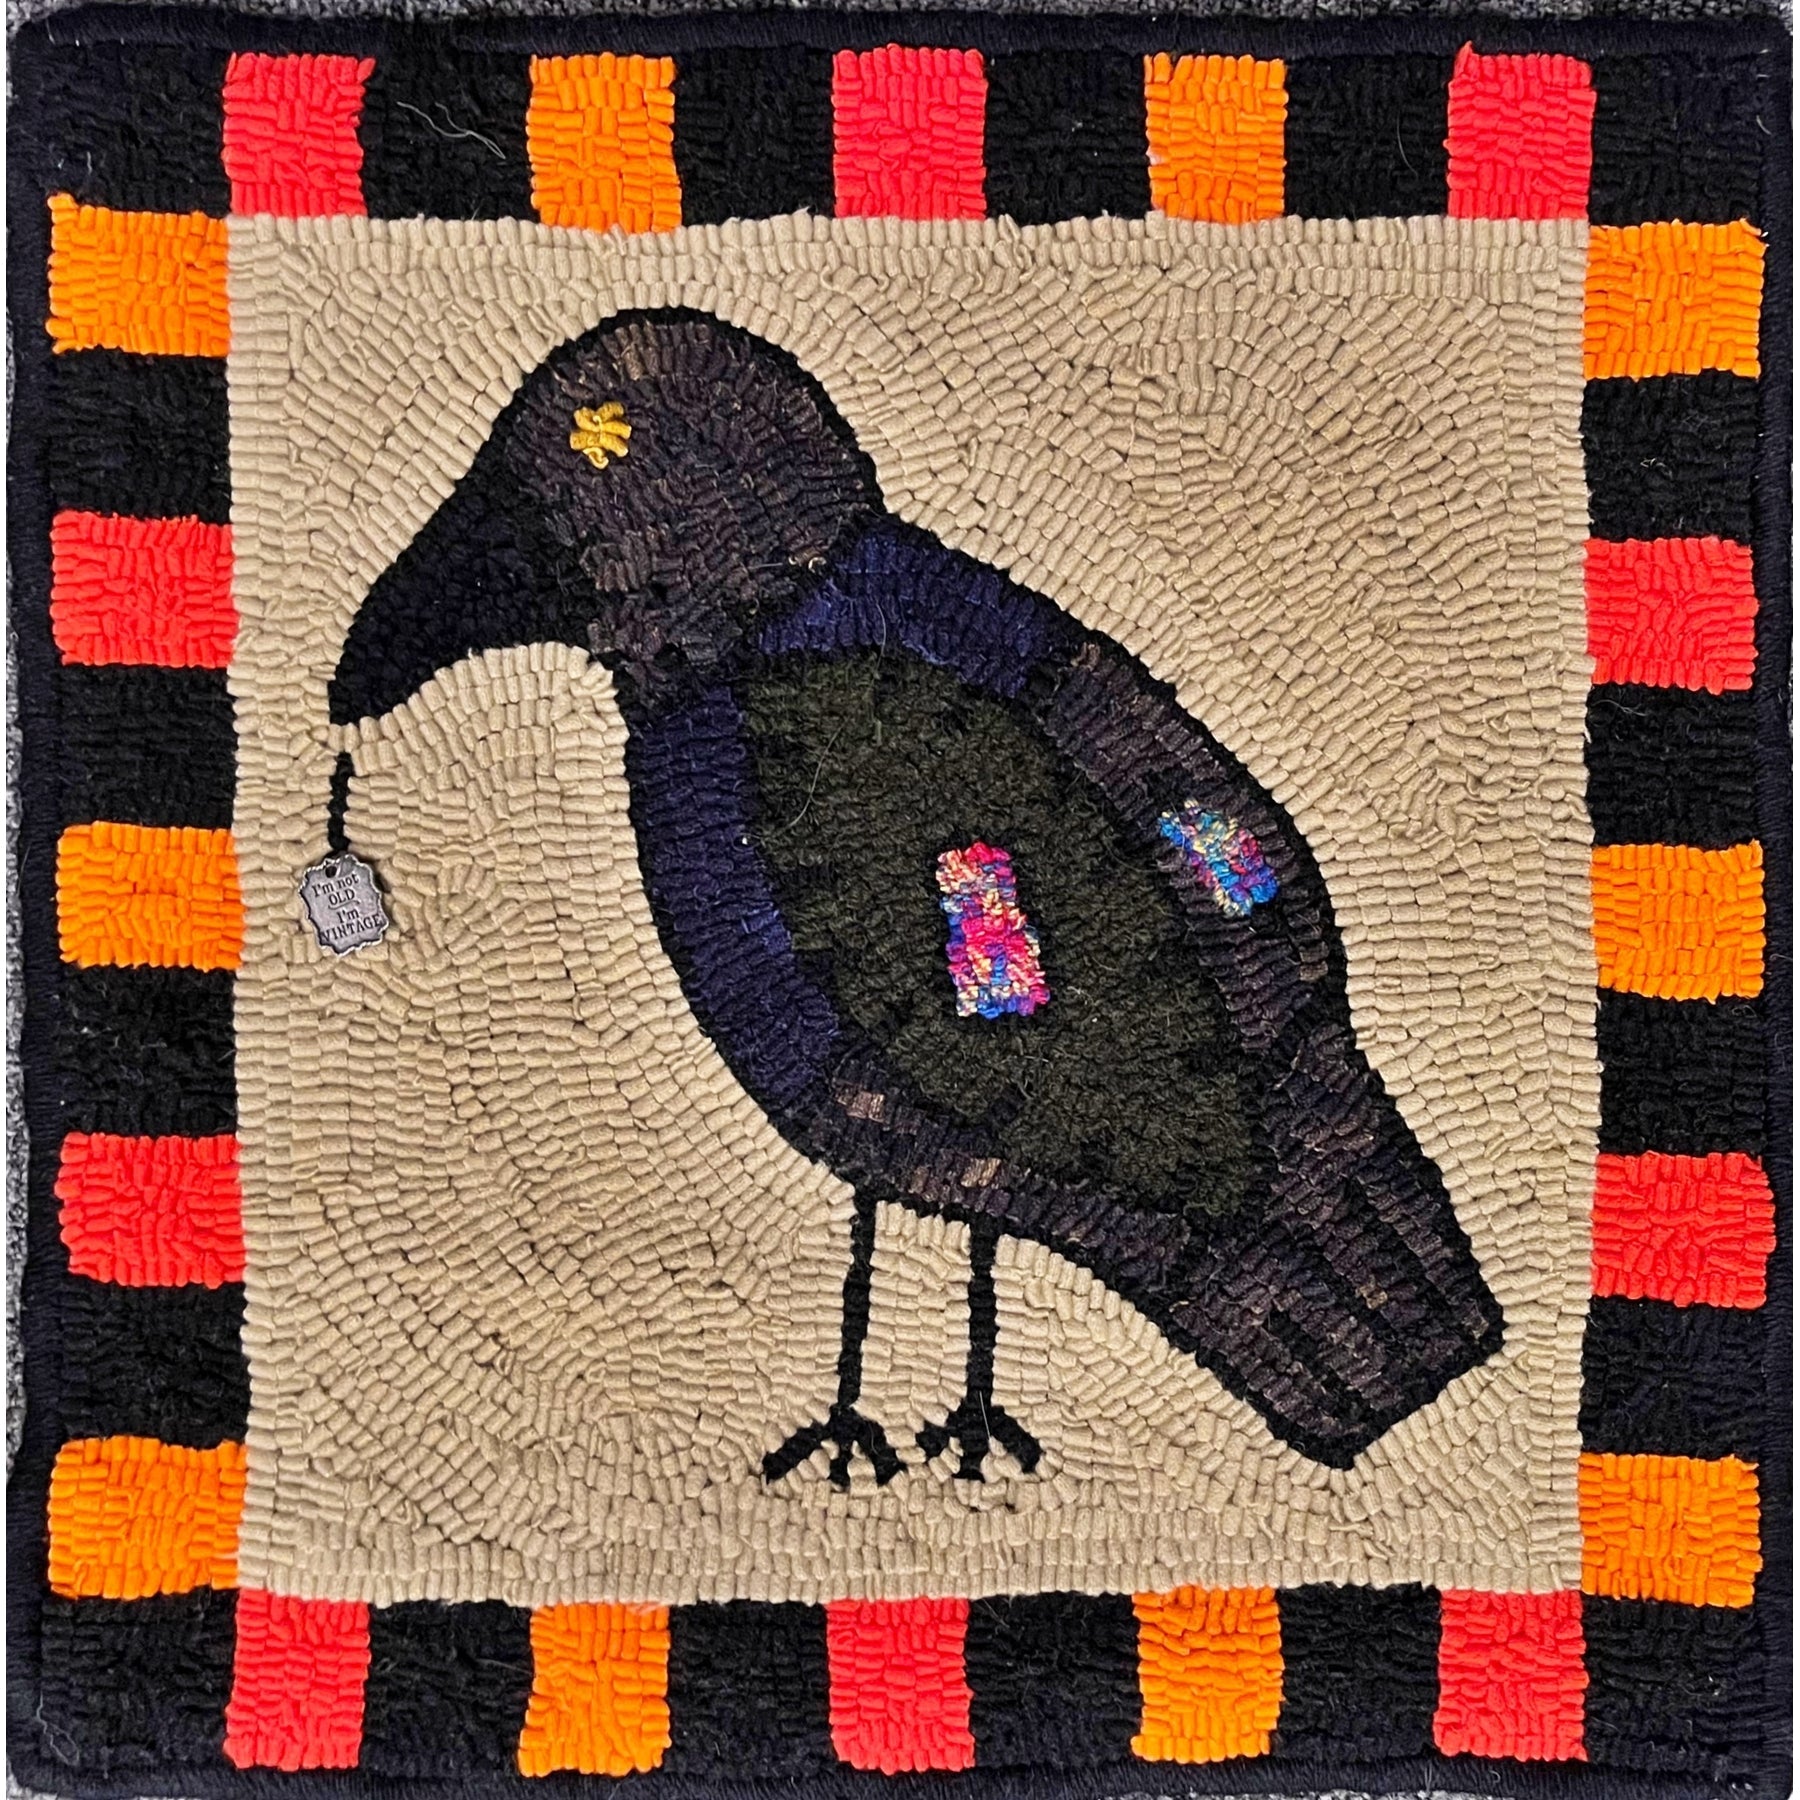 Crow Patch, rug hooked by Judy Peluso